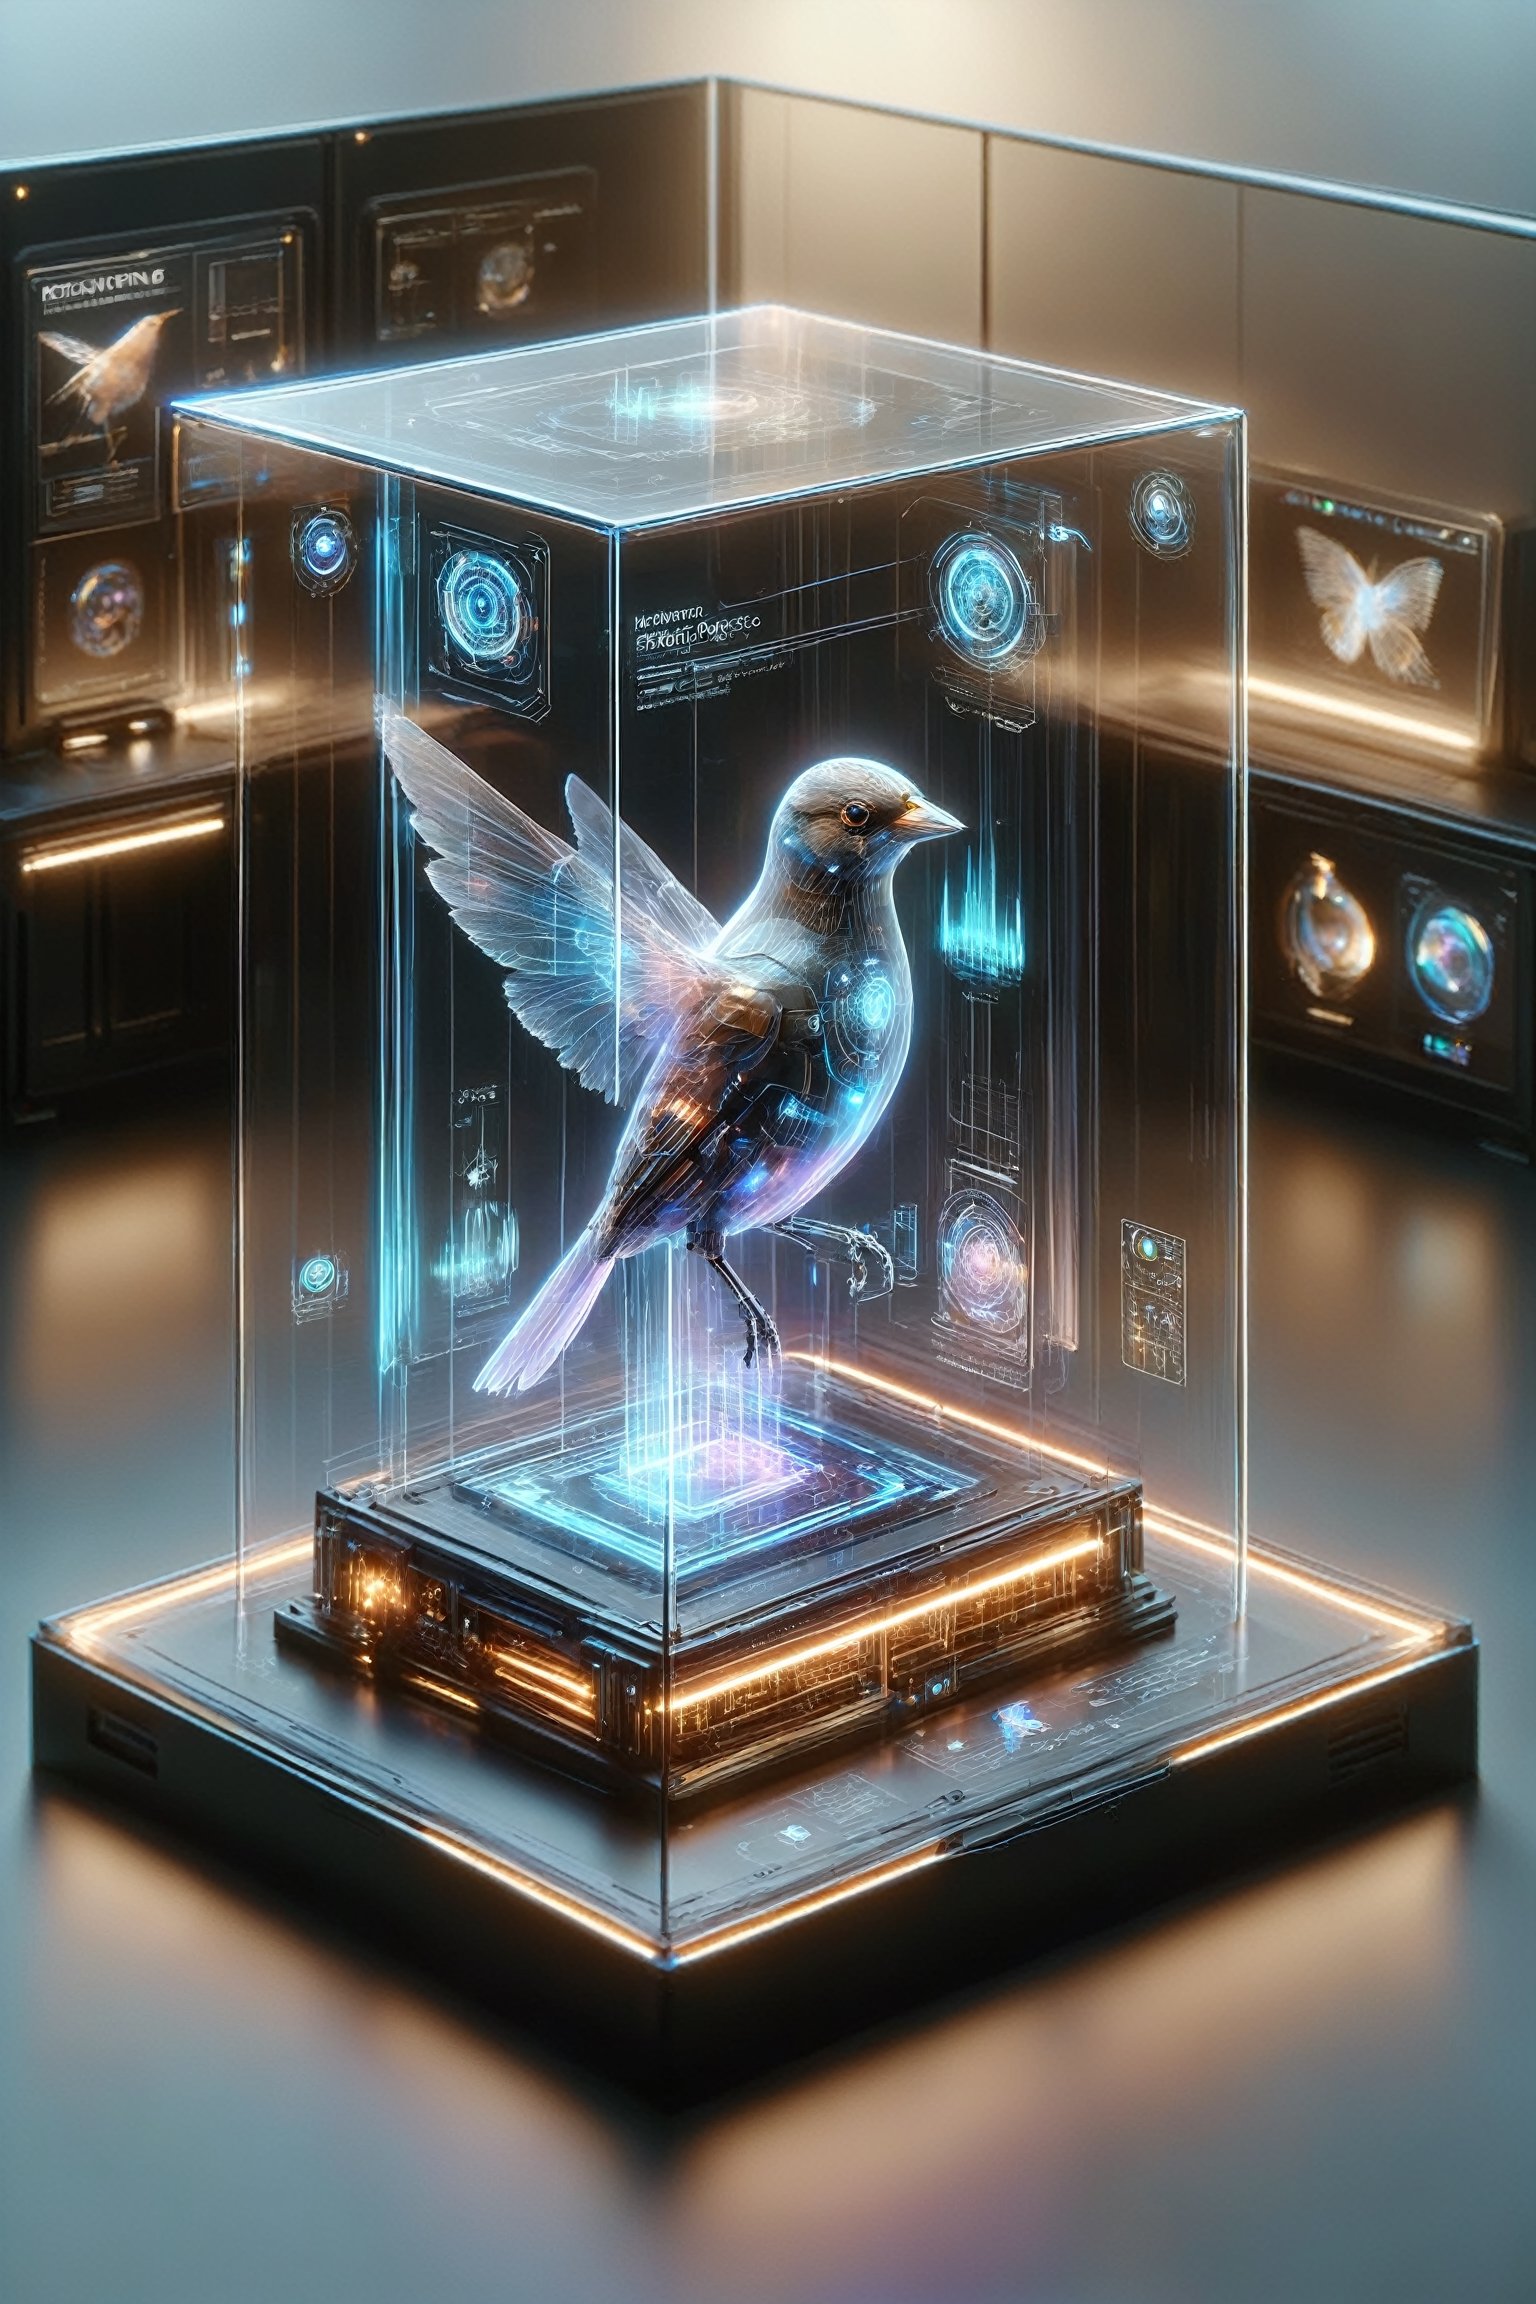 Giant, engineered 3D printers,Hologram Small bird being synthesized by 3D printer,Transparent Cyborg Grayish Baywing,glass made mechanical cute bird,reddish-brown tone wings,eyes and nostrils is black,  it has black eyes,  black legs,c1bo,Clear Glass Skin,gbaywing,DonMH010D15pl4yXL 